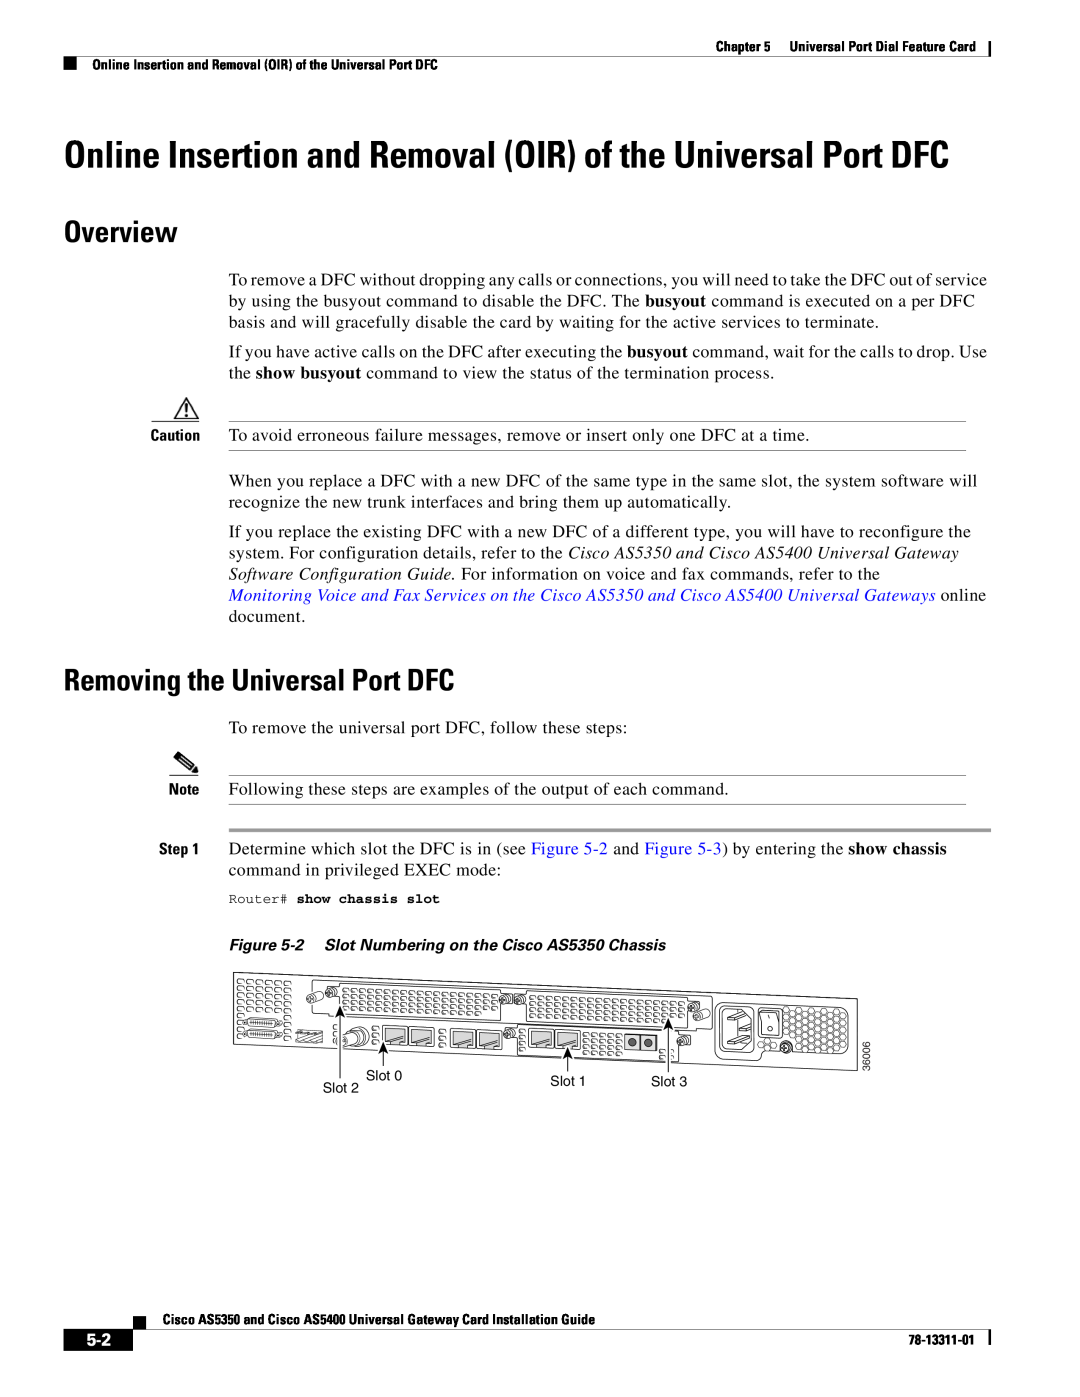 Cisco Systems AS5400 Online Insertion and Removal OIR of the Universal Port DFC, Removing the Universal Port DFC, Overview 